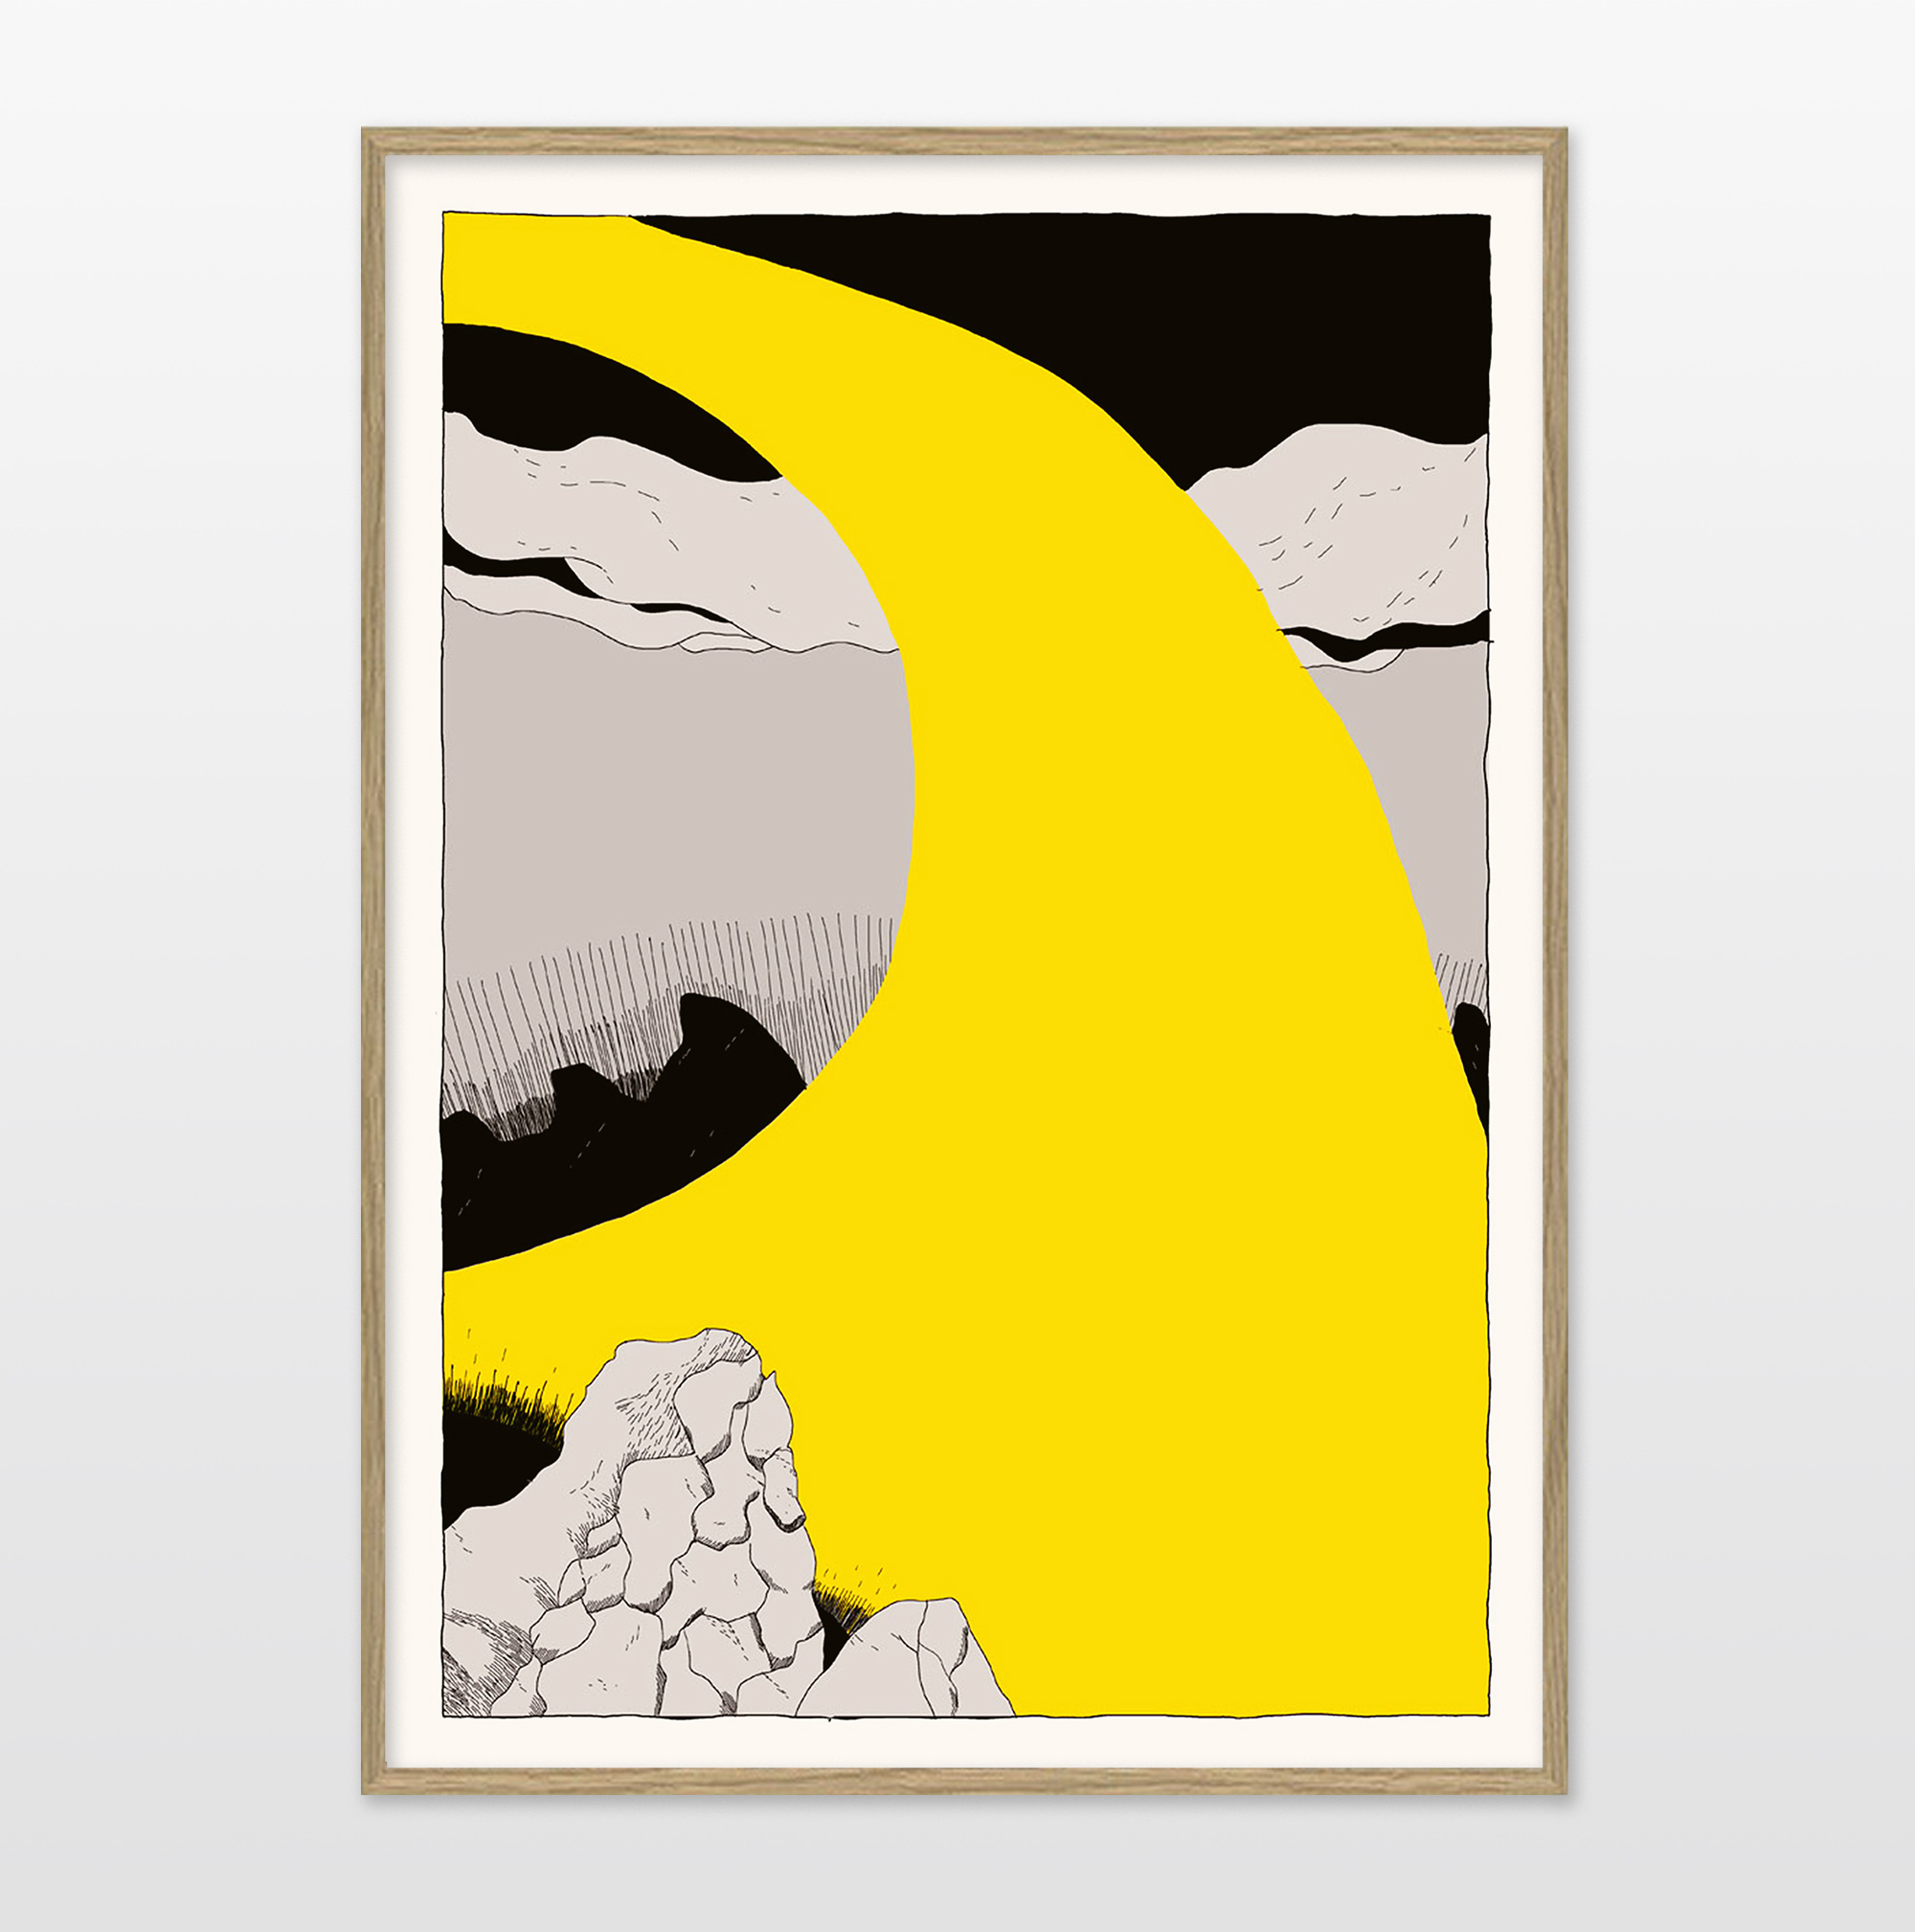 posters-prints, giclee-print, abstract, graphical, illustrative, landscape, cartoons, movement, nature, black, grey, yellow, paper, abstract-forms, contemporary-art, danish, decorative, design, interior, interior-design, modern, modern-art, nordic, posters, prints, scandinavien, scenery, Buy original high quality art. Paintings, drawings, limited edition prints & posters by talented artists.